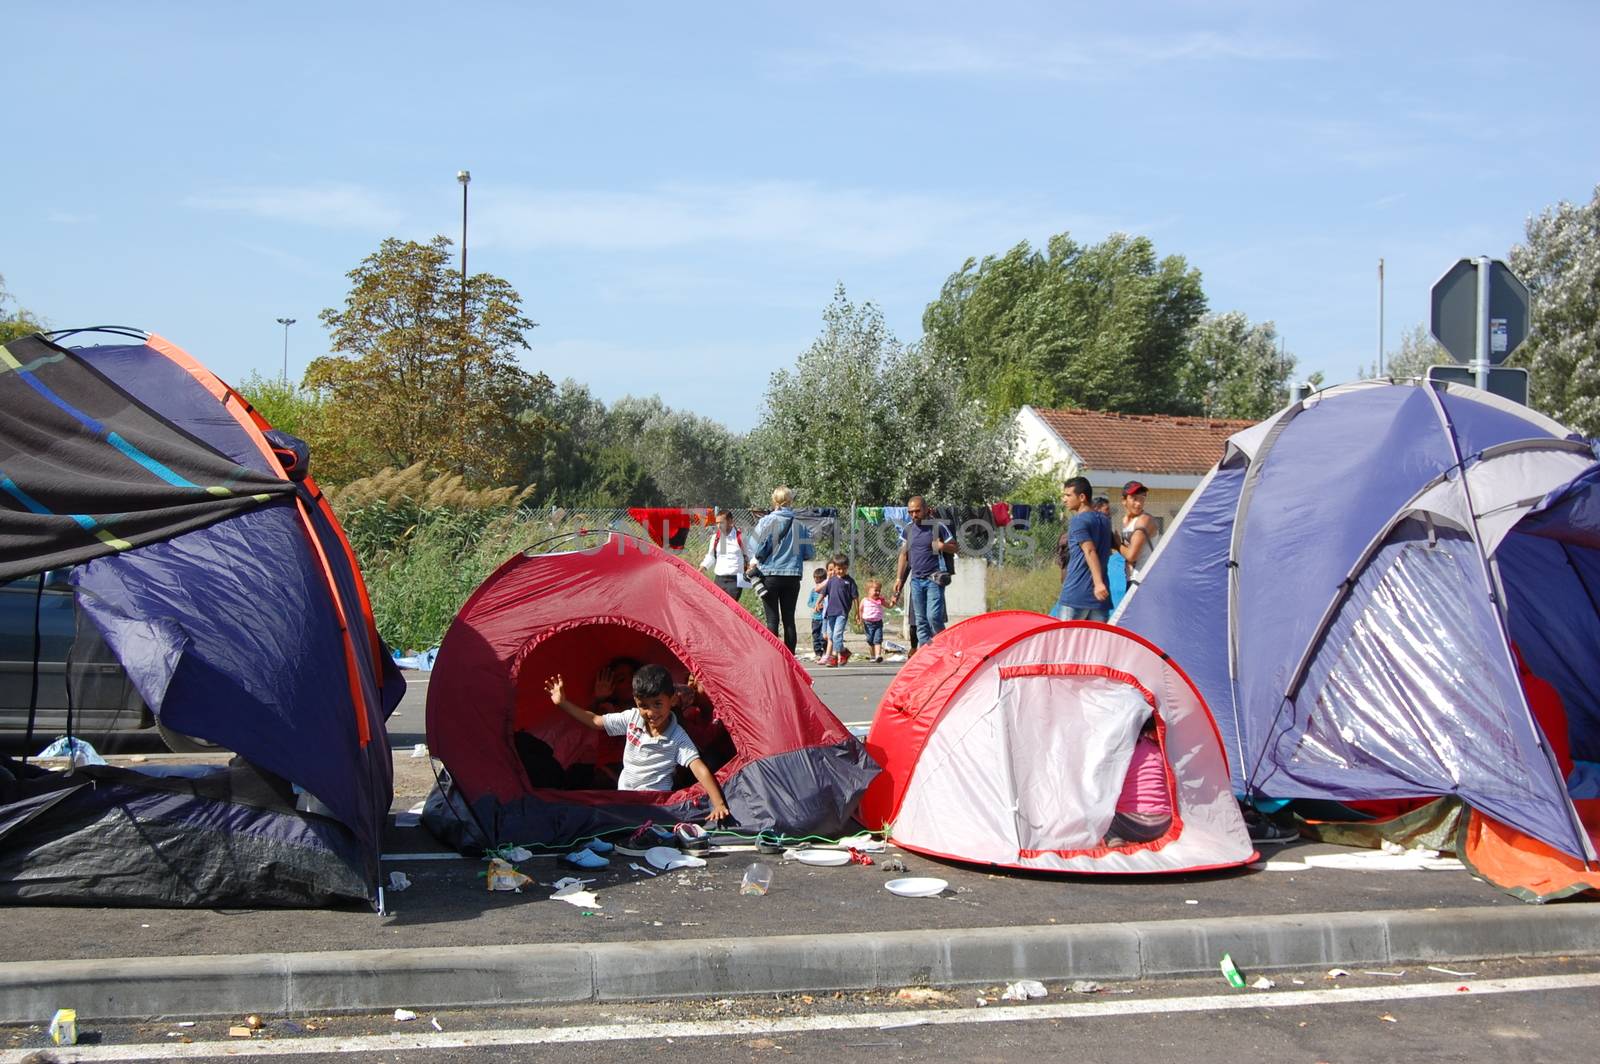 SERBIA, Horgo�: Migrants sit in tents and gather near the Serbia-Hungary border in Horgo�, Serbia on September 17, 2015. Recently the migrants have clashed with police forcing the police to use tear gas and water cannons to hold the refugees at bay. The migrants demanded that the razor-wire fence be opened, which would allow them to continue their journey though Europe. 